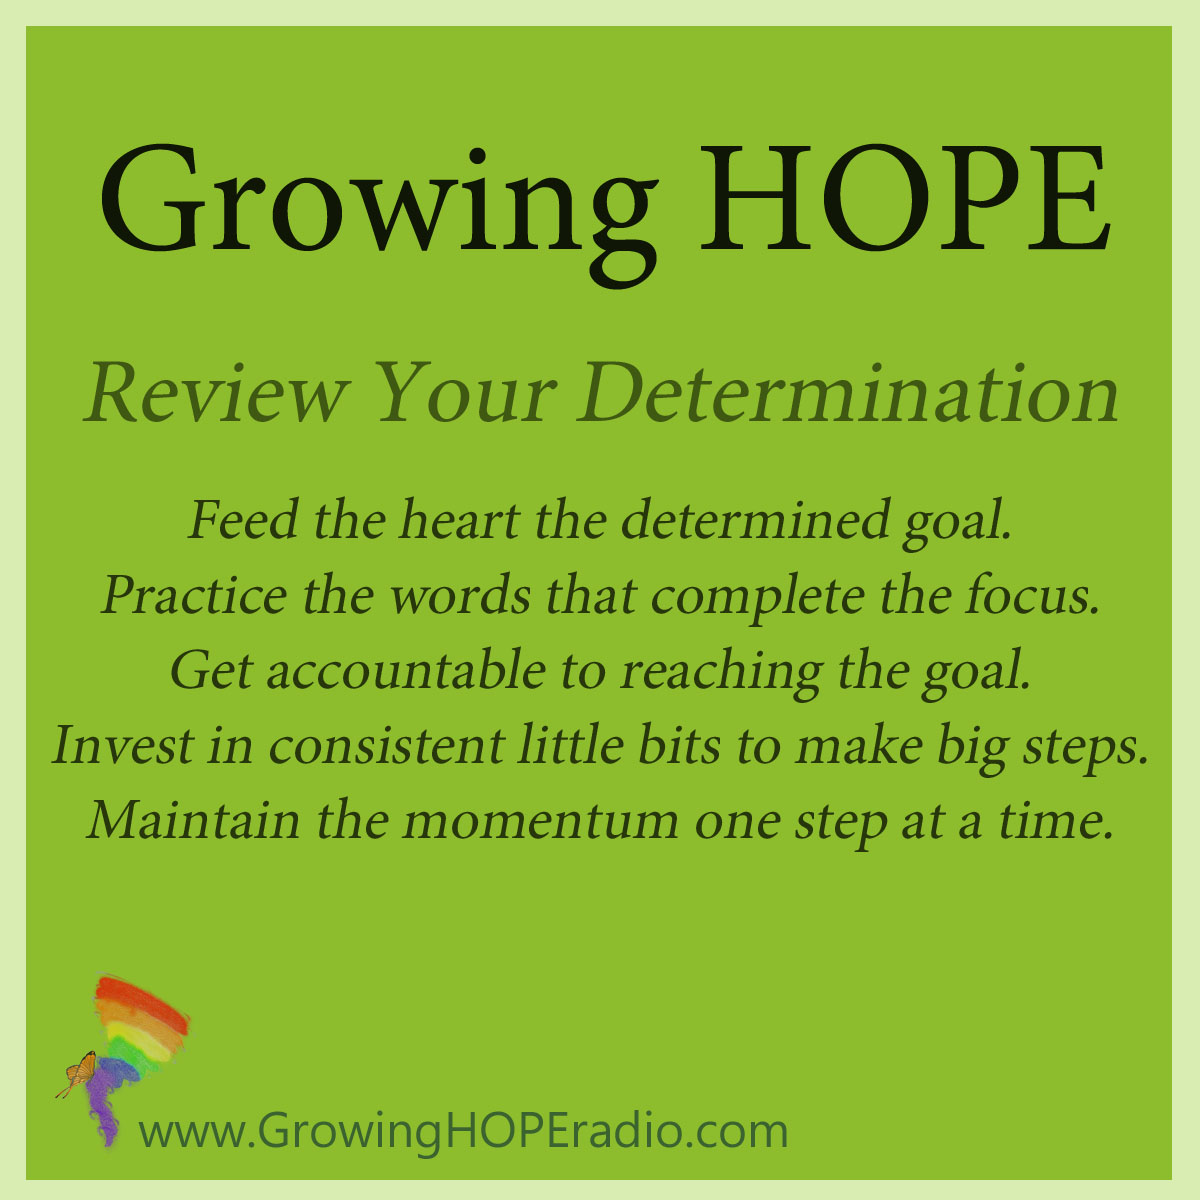 #GrowingHOPE Daily - review your determination